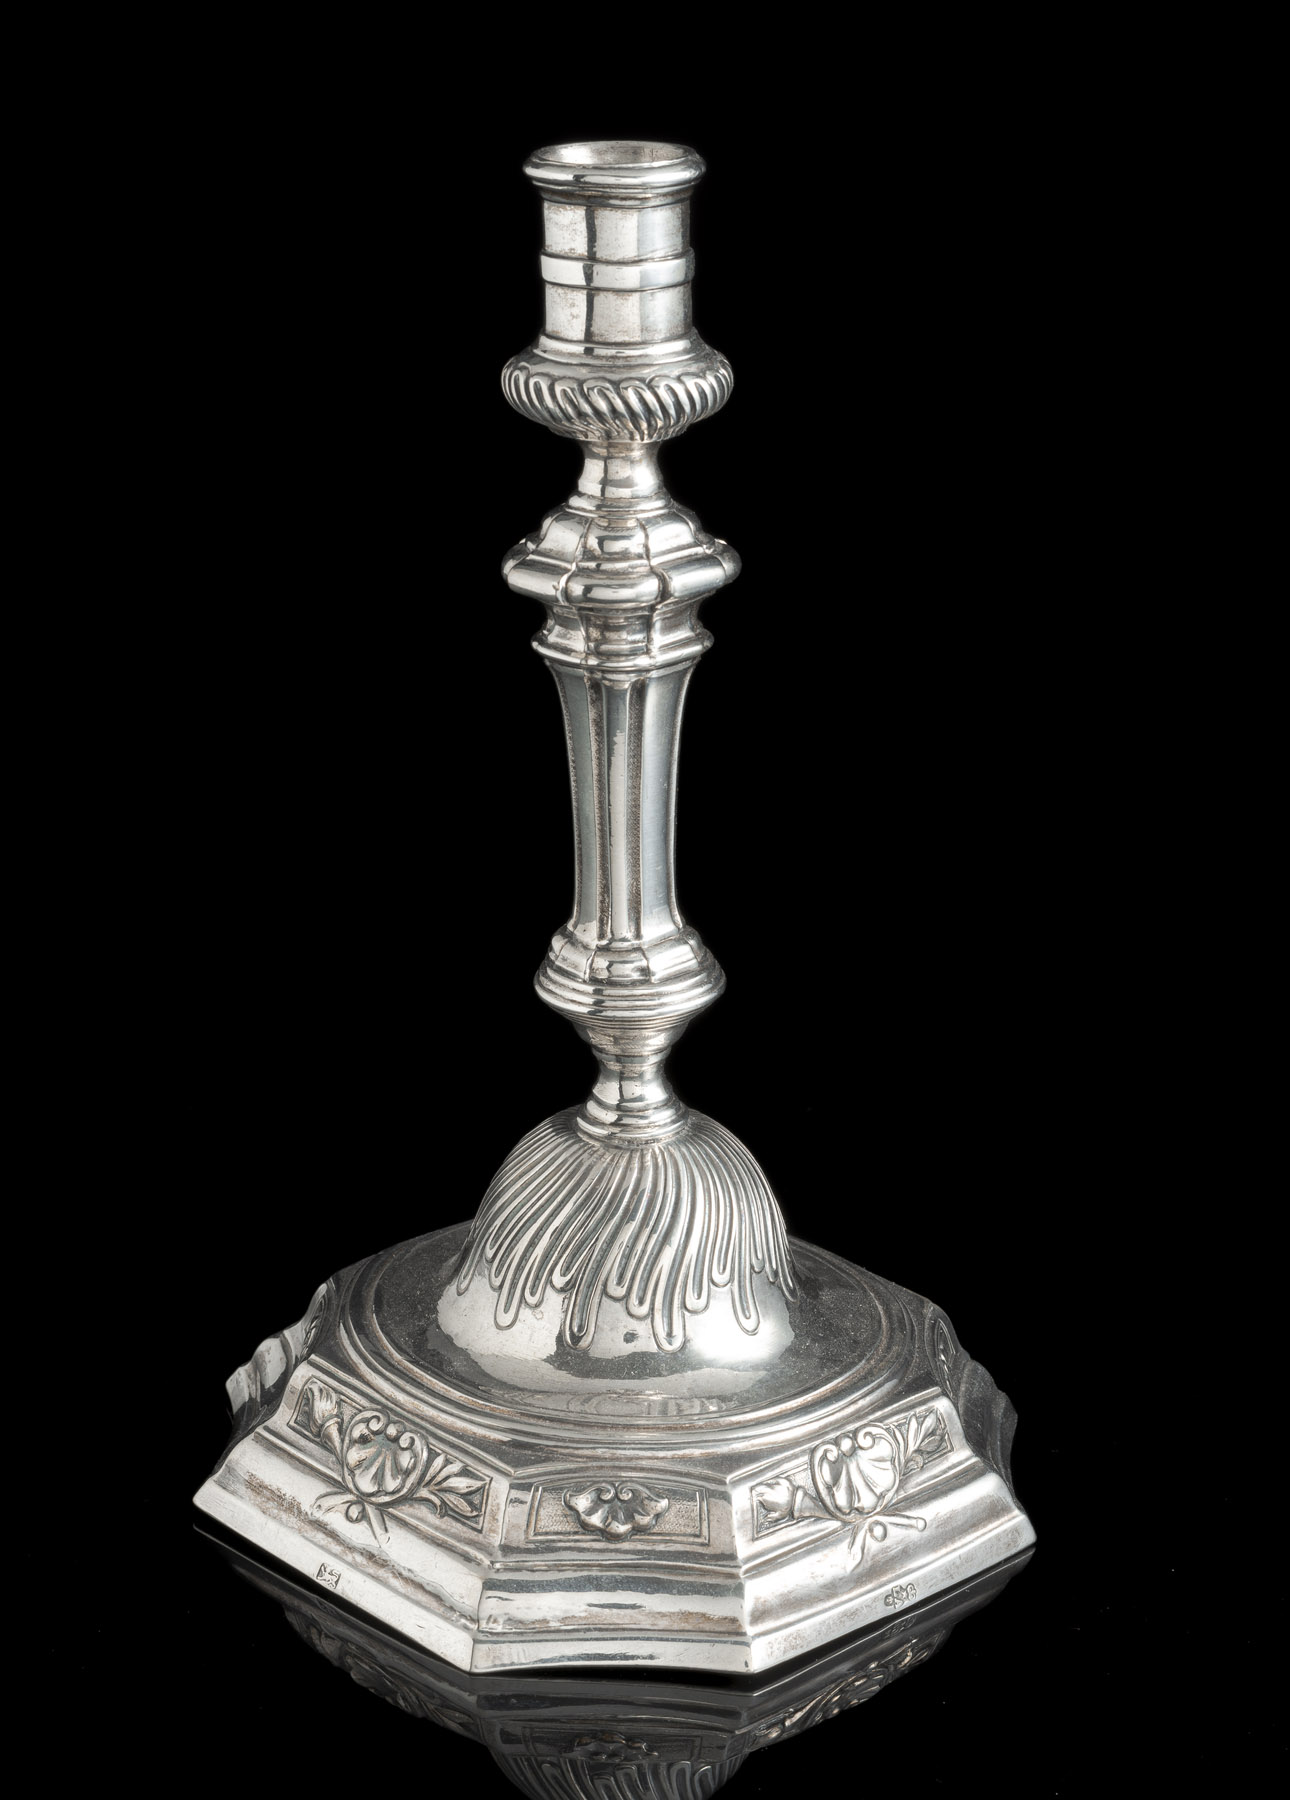 A RARE GEORGE I SILVER CANDLESTICK BY PAUL DE LAMERIE - Image 2 of 3